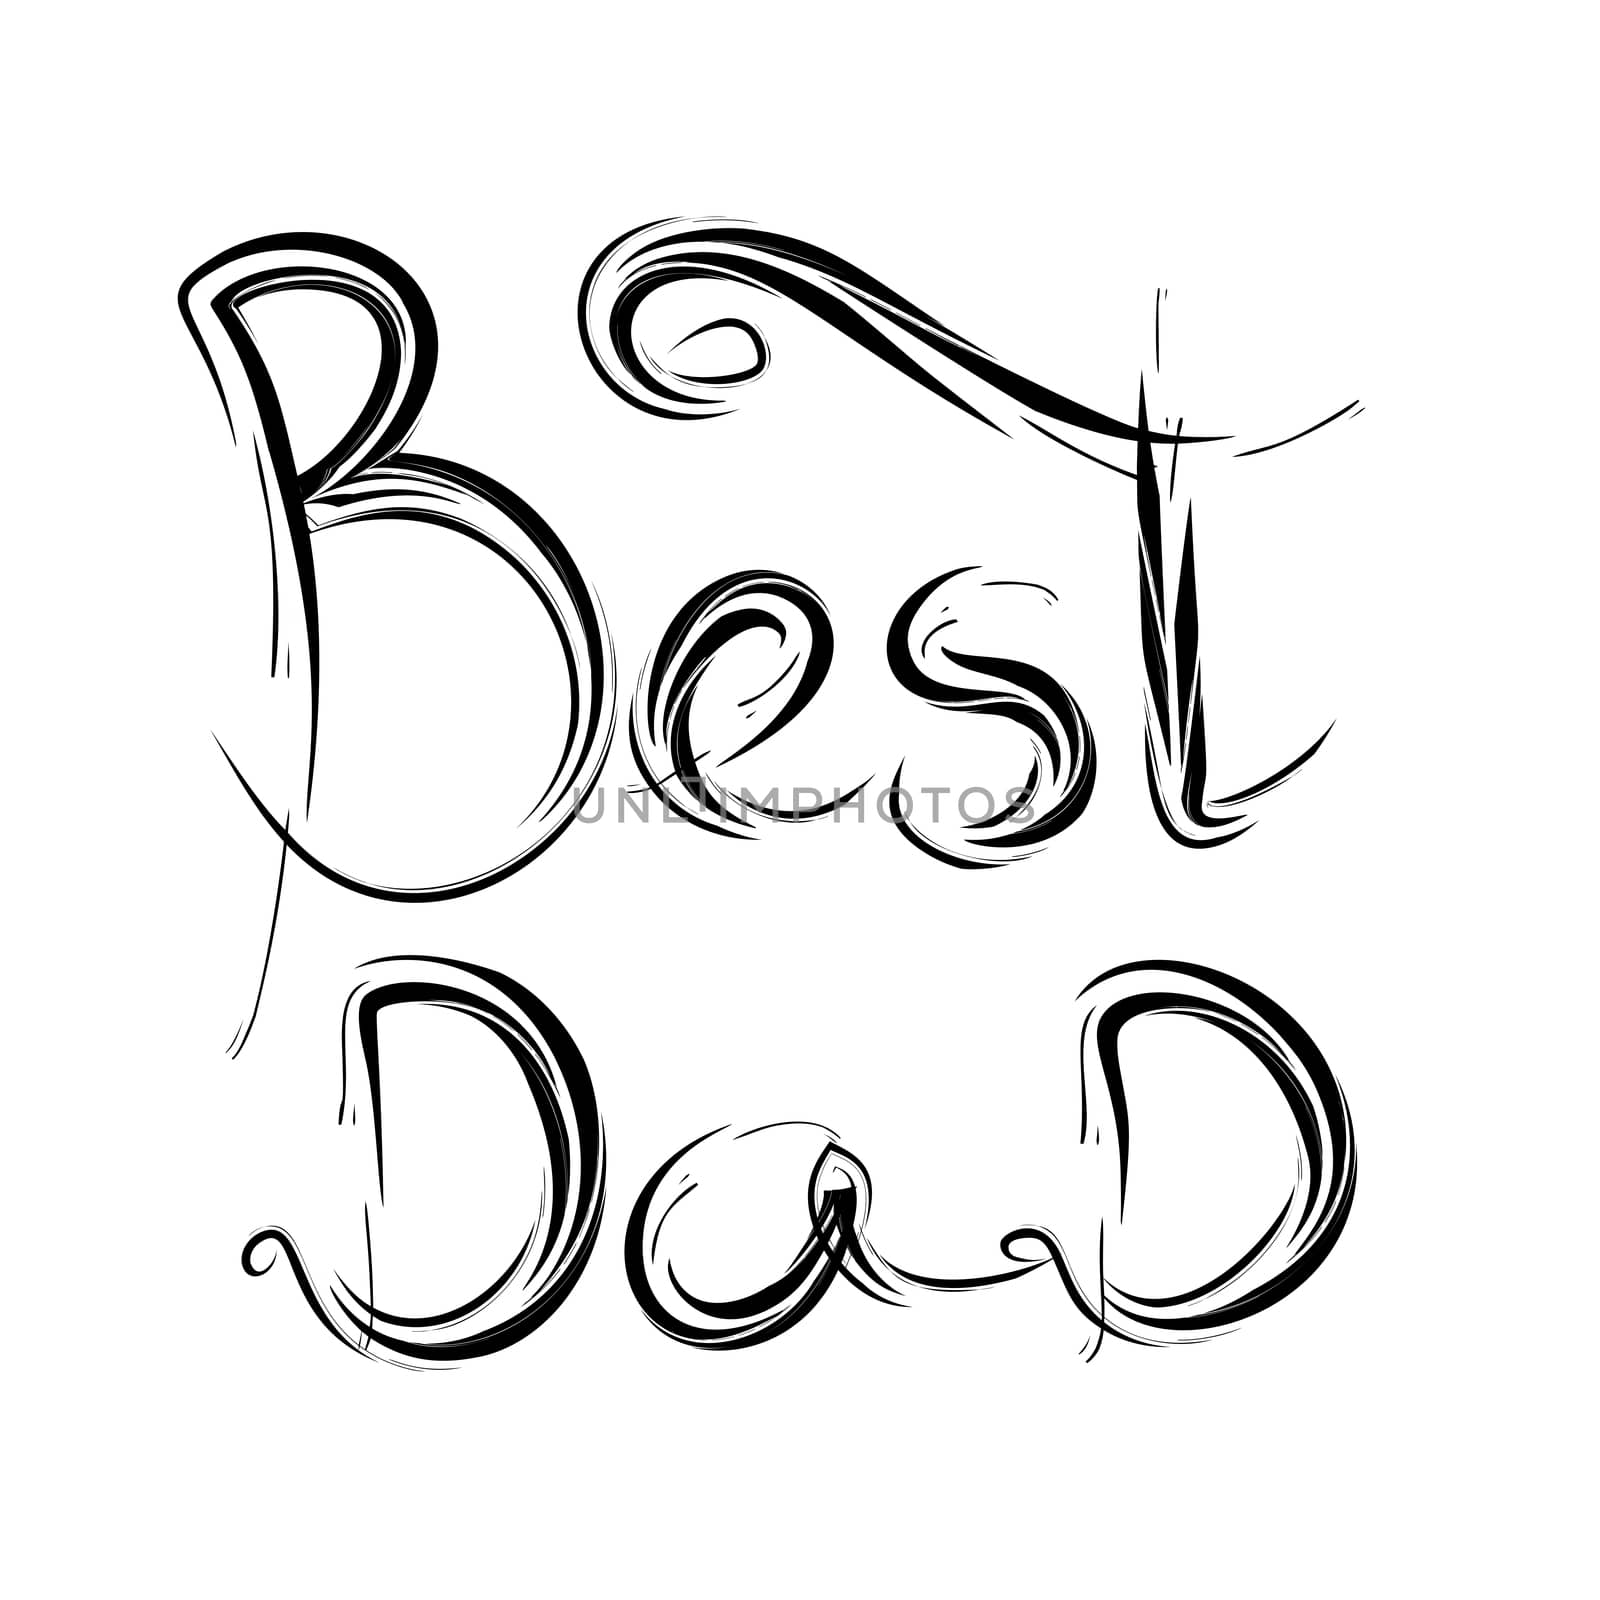 Best Dad. hand-written lettering, t-shirt print design, typographic composition isolated on white background